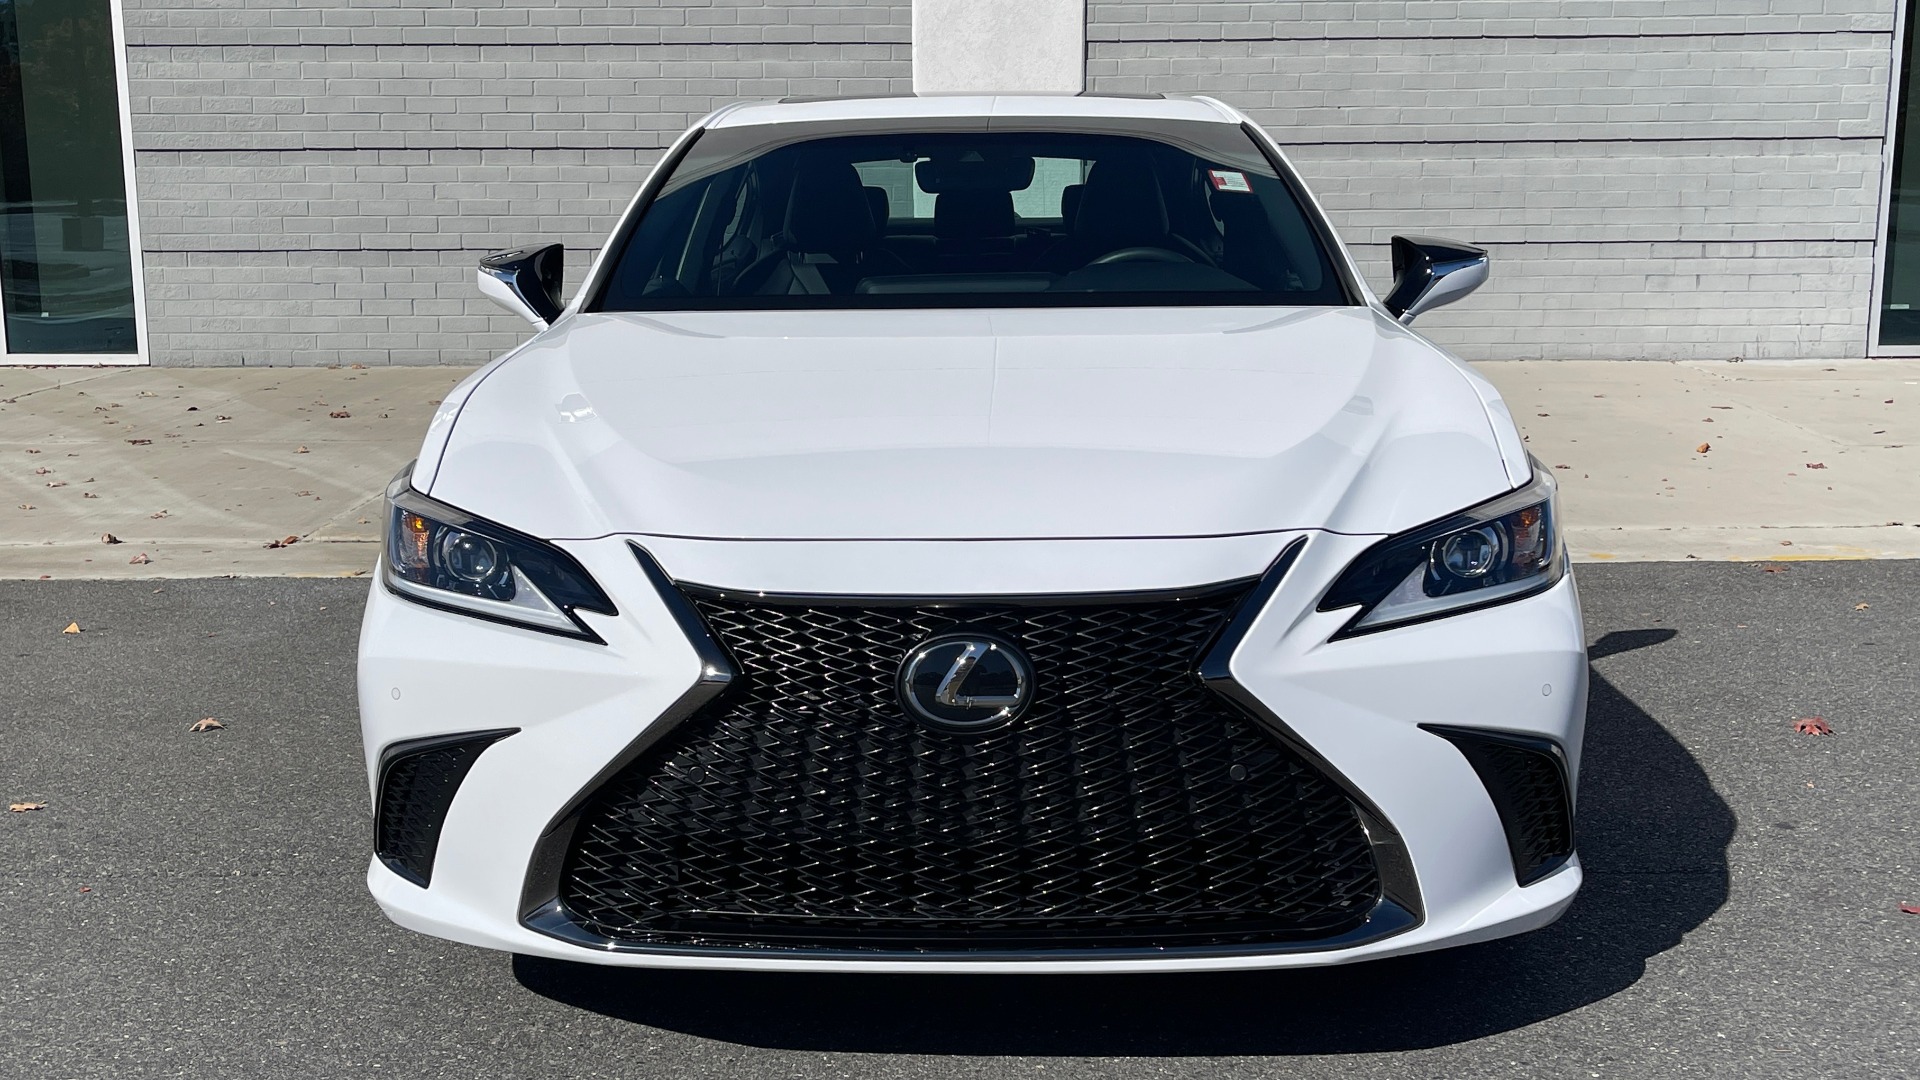 Used 2019 Lexus ES 350 F-SPORT 3.5L SEDAN / 8-SPD / NAV / SUNROOF / REARVIEW for sale Sold at Formula Imports in Charlotte NC 28227 12